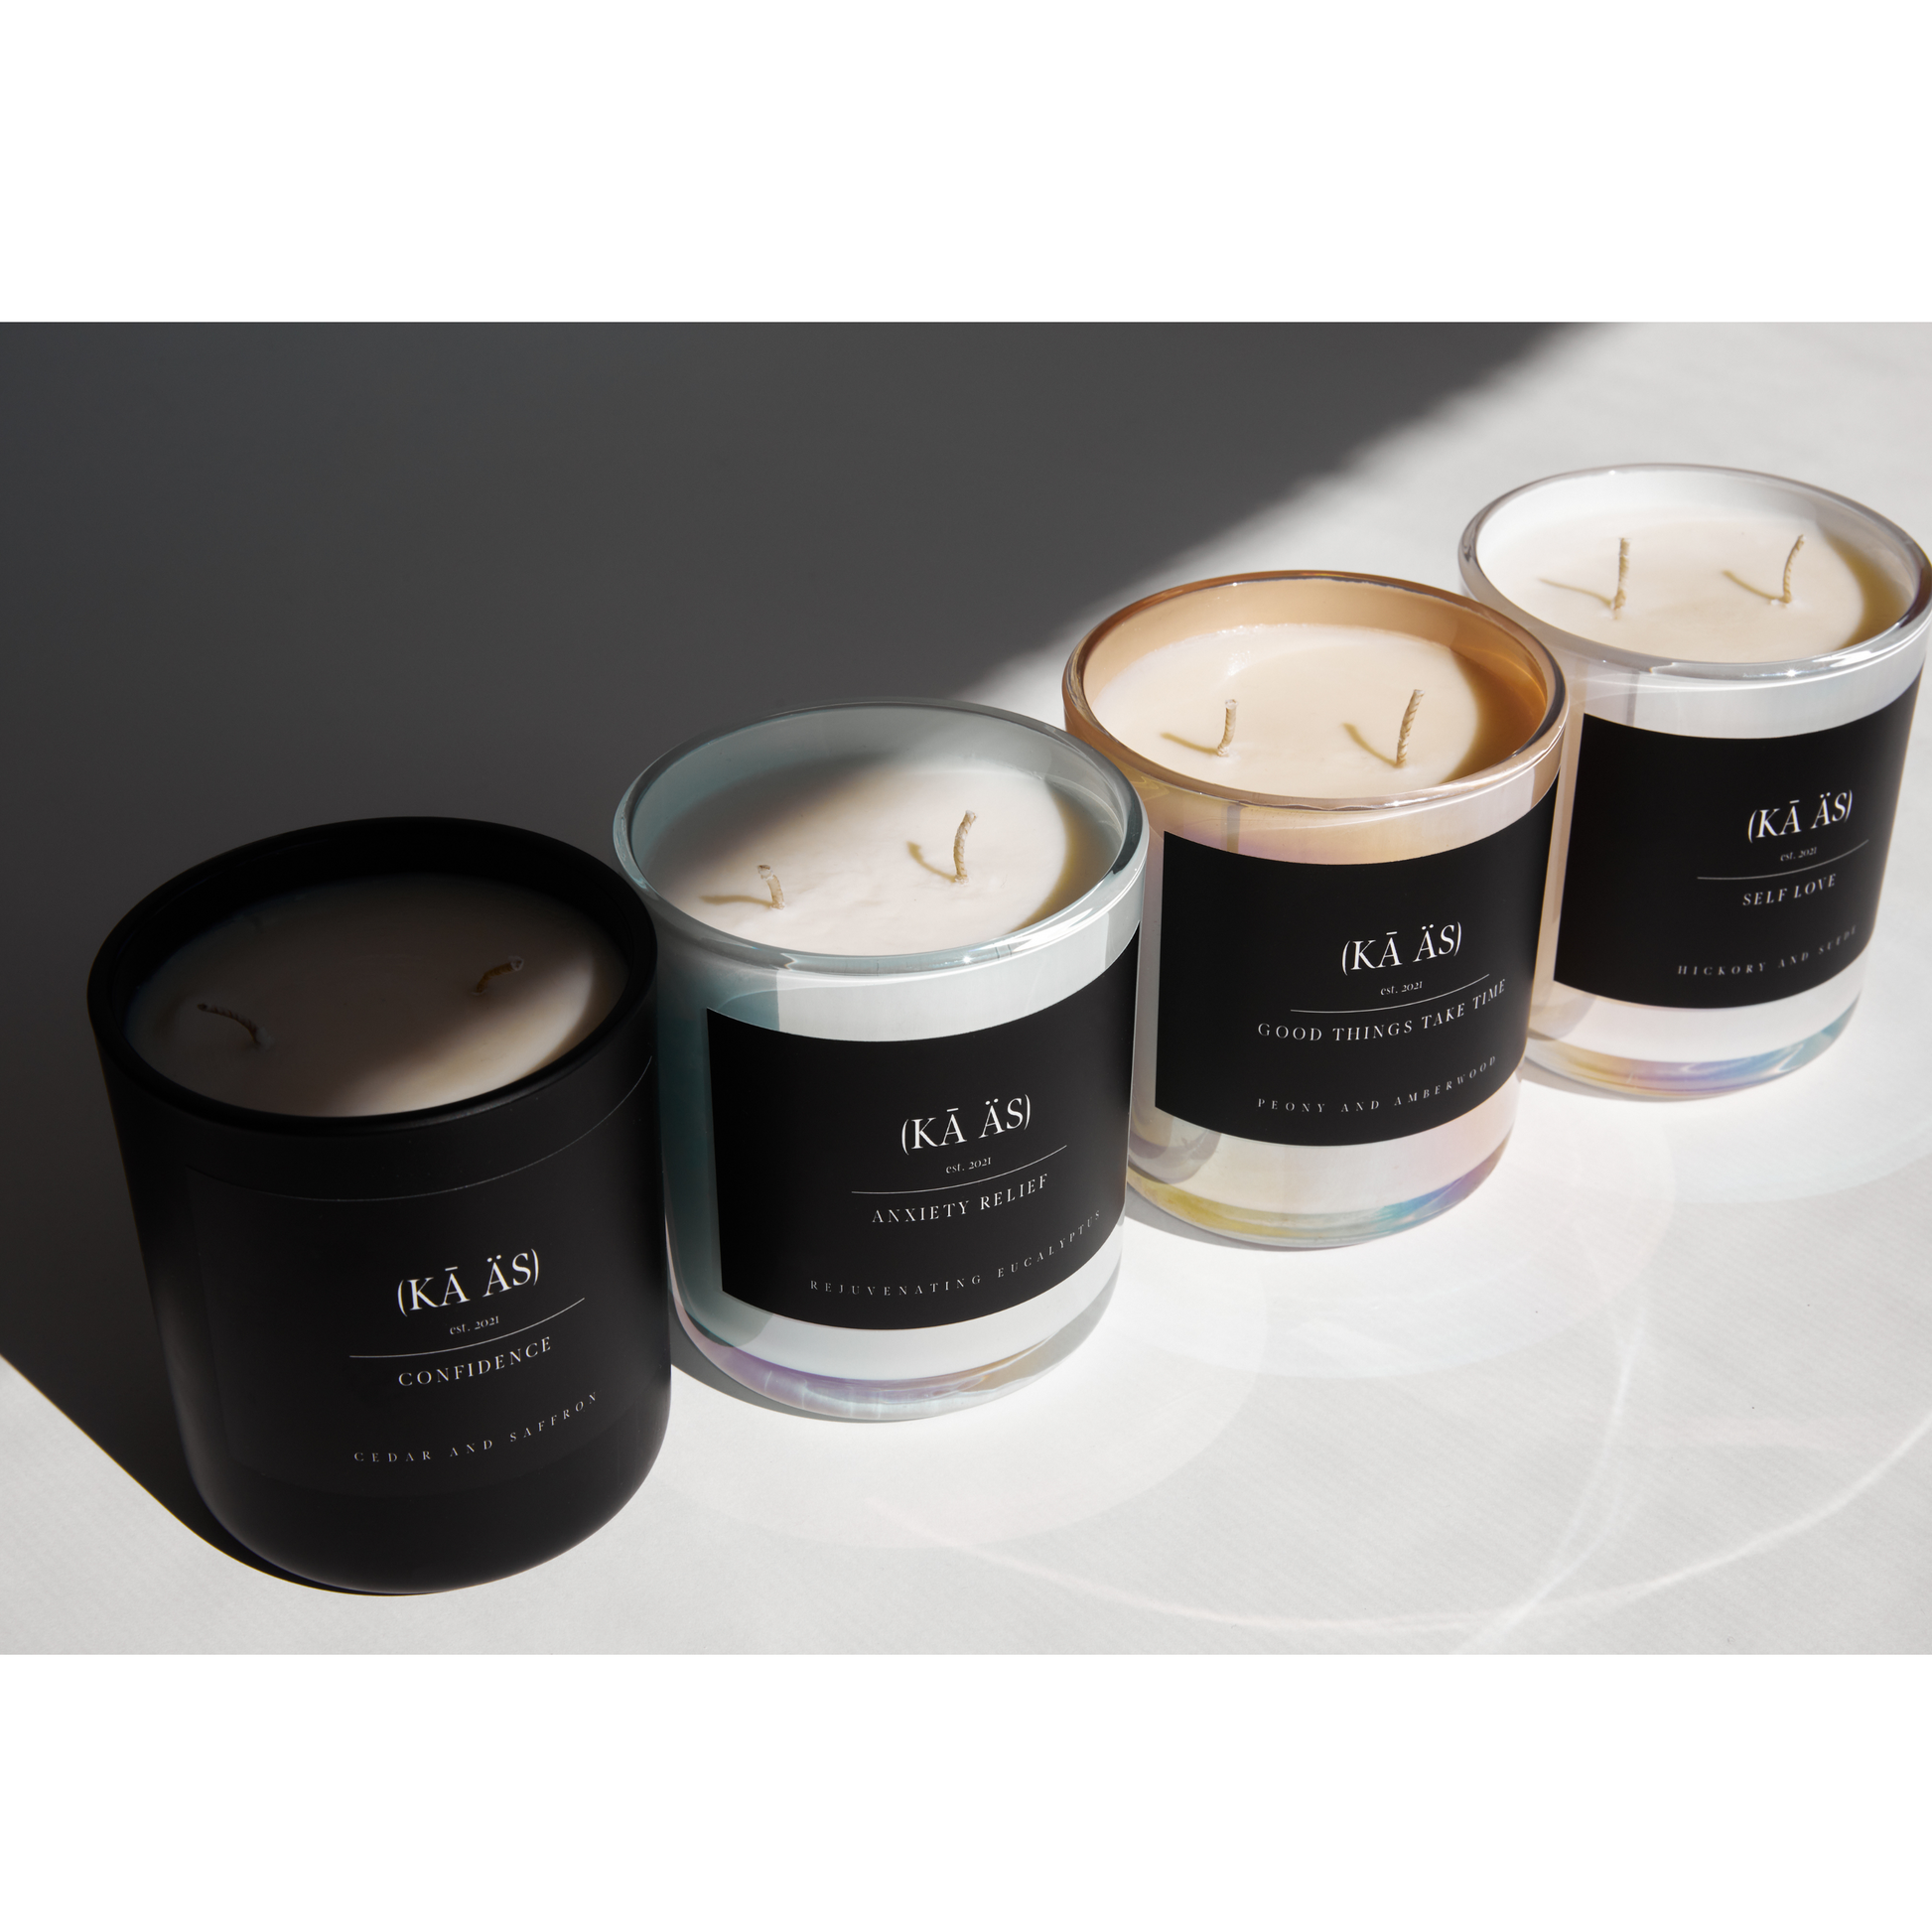 self love, hickory and suede scented candles iridescent white vessel